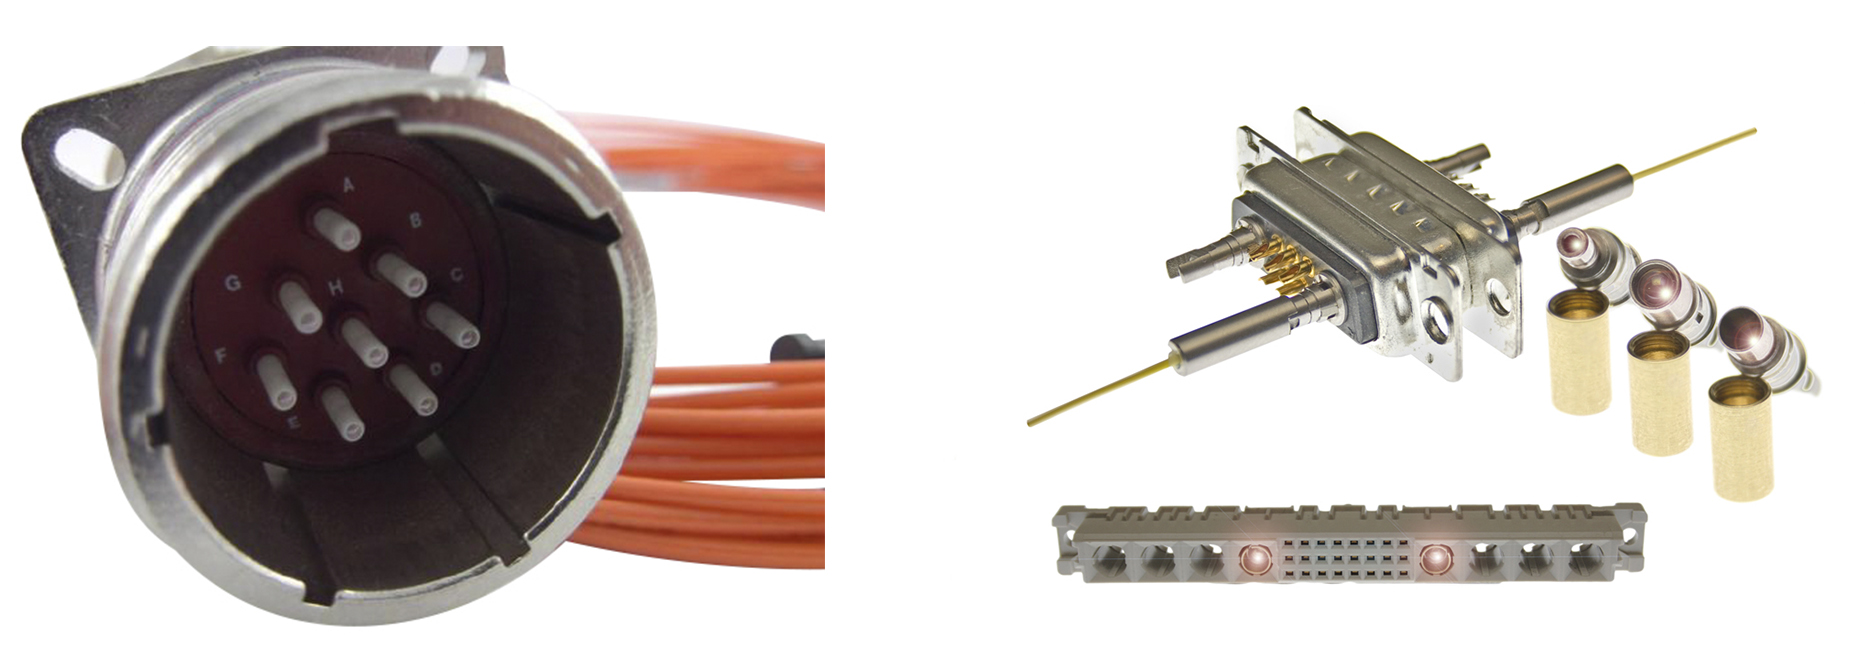 Example of expanded beam termini in MILDTL- 38999 SIII connector (left). Example of expanded beam termini in D-Sub and backplane connectors (right).